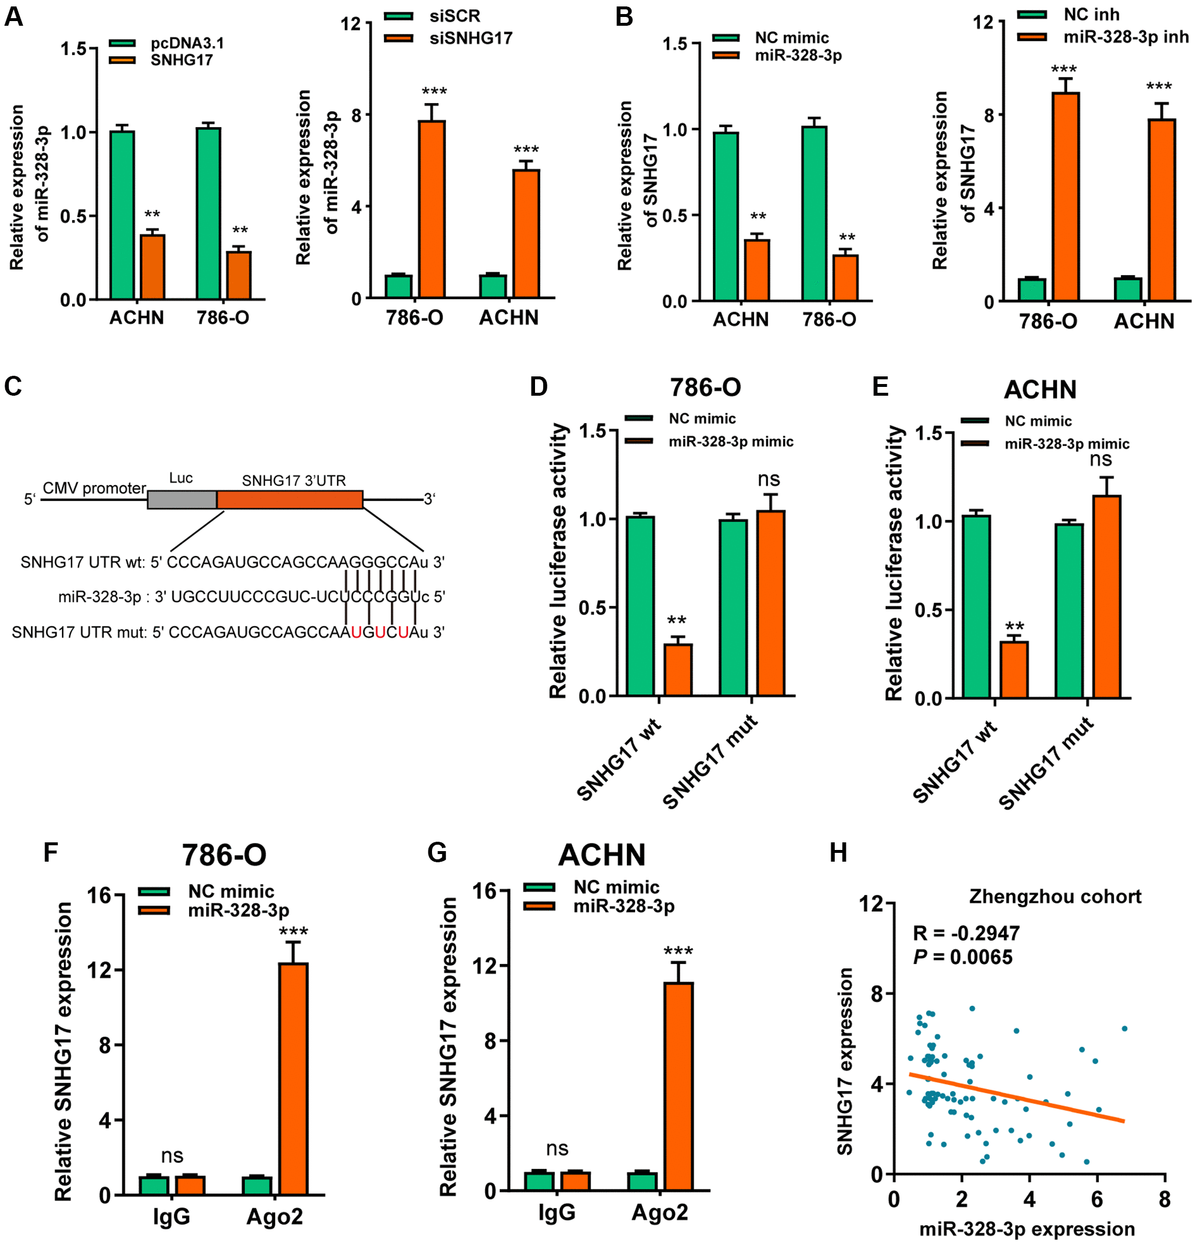 MiR-328-3p is sponged by SNHG17. (A–B) qRT-PCR assay analysis of the expression of miR-328-3p (A) and SNHG17 (B) in 786-O and ACHN cell lines after transfection with the indicated vectors. (C) The potential binding sites of SNHG17 and miR-328-3p were predicted by StarBase v3.0. (D–E) Luciferase activity was analyzed in 786-O and ACHN cells co-transfected with miR-328-3p mimic or NC mimic and SNHG17 wt or mut luciferase reporter vector. (F–G) The level of SNHG17 enriched by Ago2 antibody was detected in 786-O and ACHN cells transfected with miR-328-3p mimic or NC mimic. (H) Spearman’s correlation analysis of the correlation between SNHG17 and miR-328-3p in RCC tissues from the Zhengzhou cohort. Data are presented as means ± standard deviation from triplicate experiments. A t-test was used to evaluate the statistical significance as compared to the control. NC, negative control; SCR, scramble; RCC, renal cell carcinoma; ns, not significant. *P **P ***P 